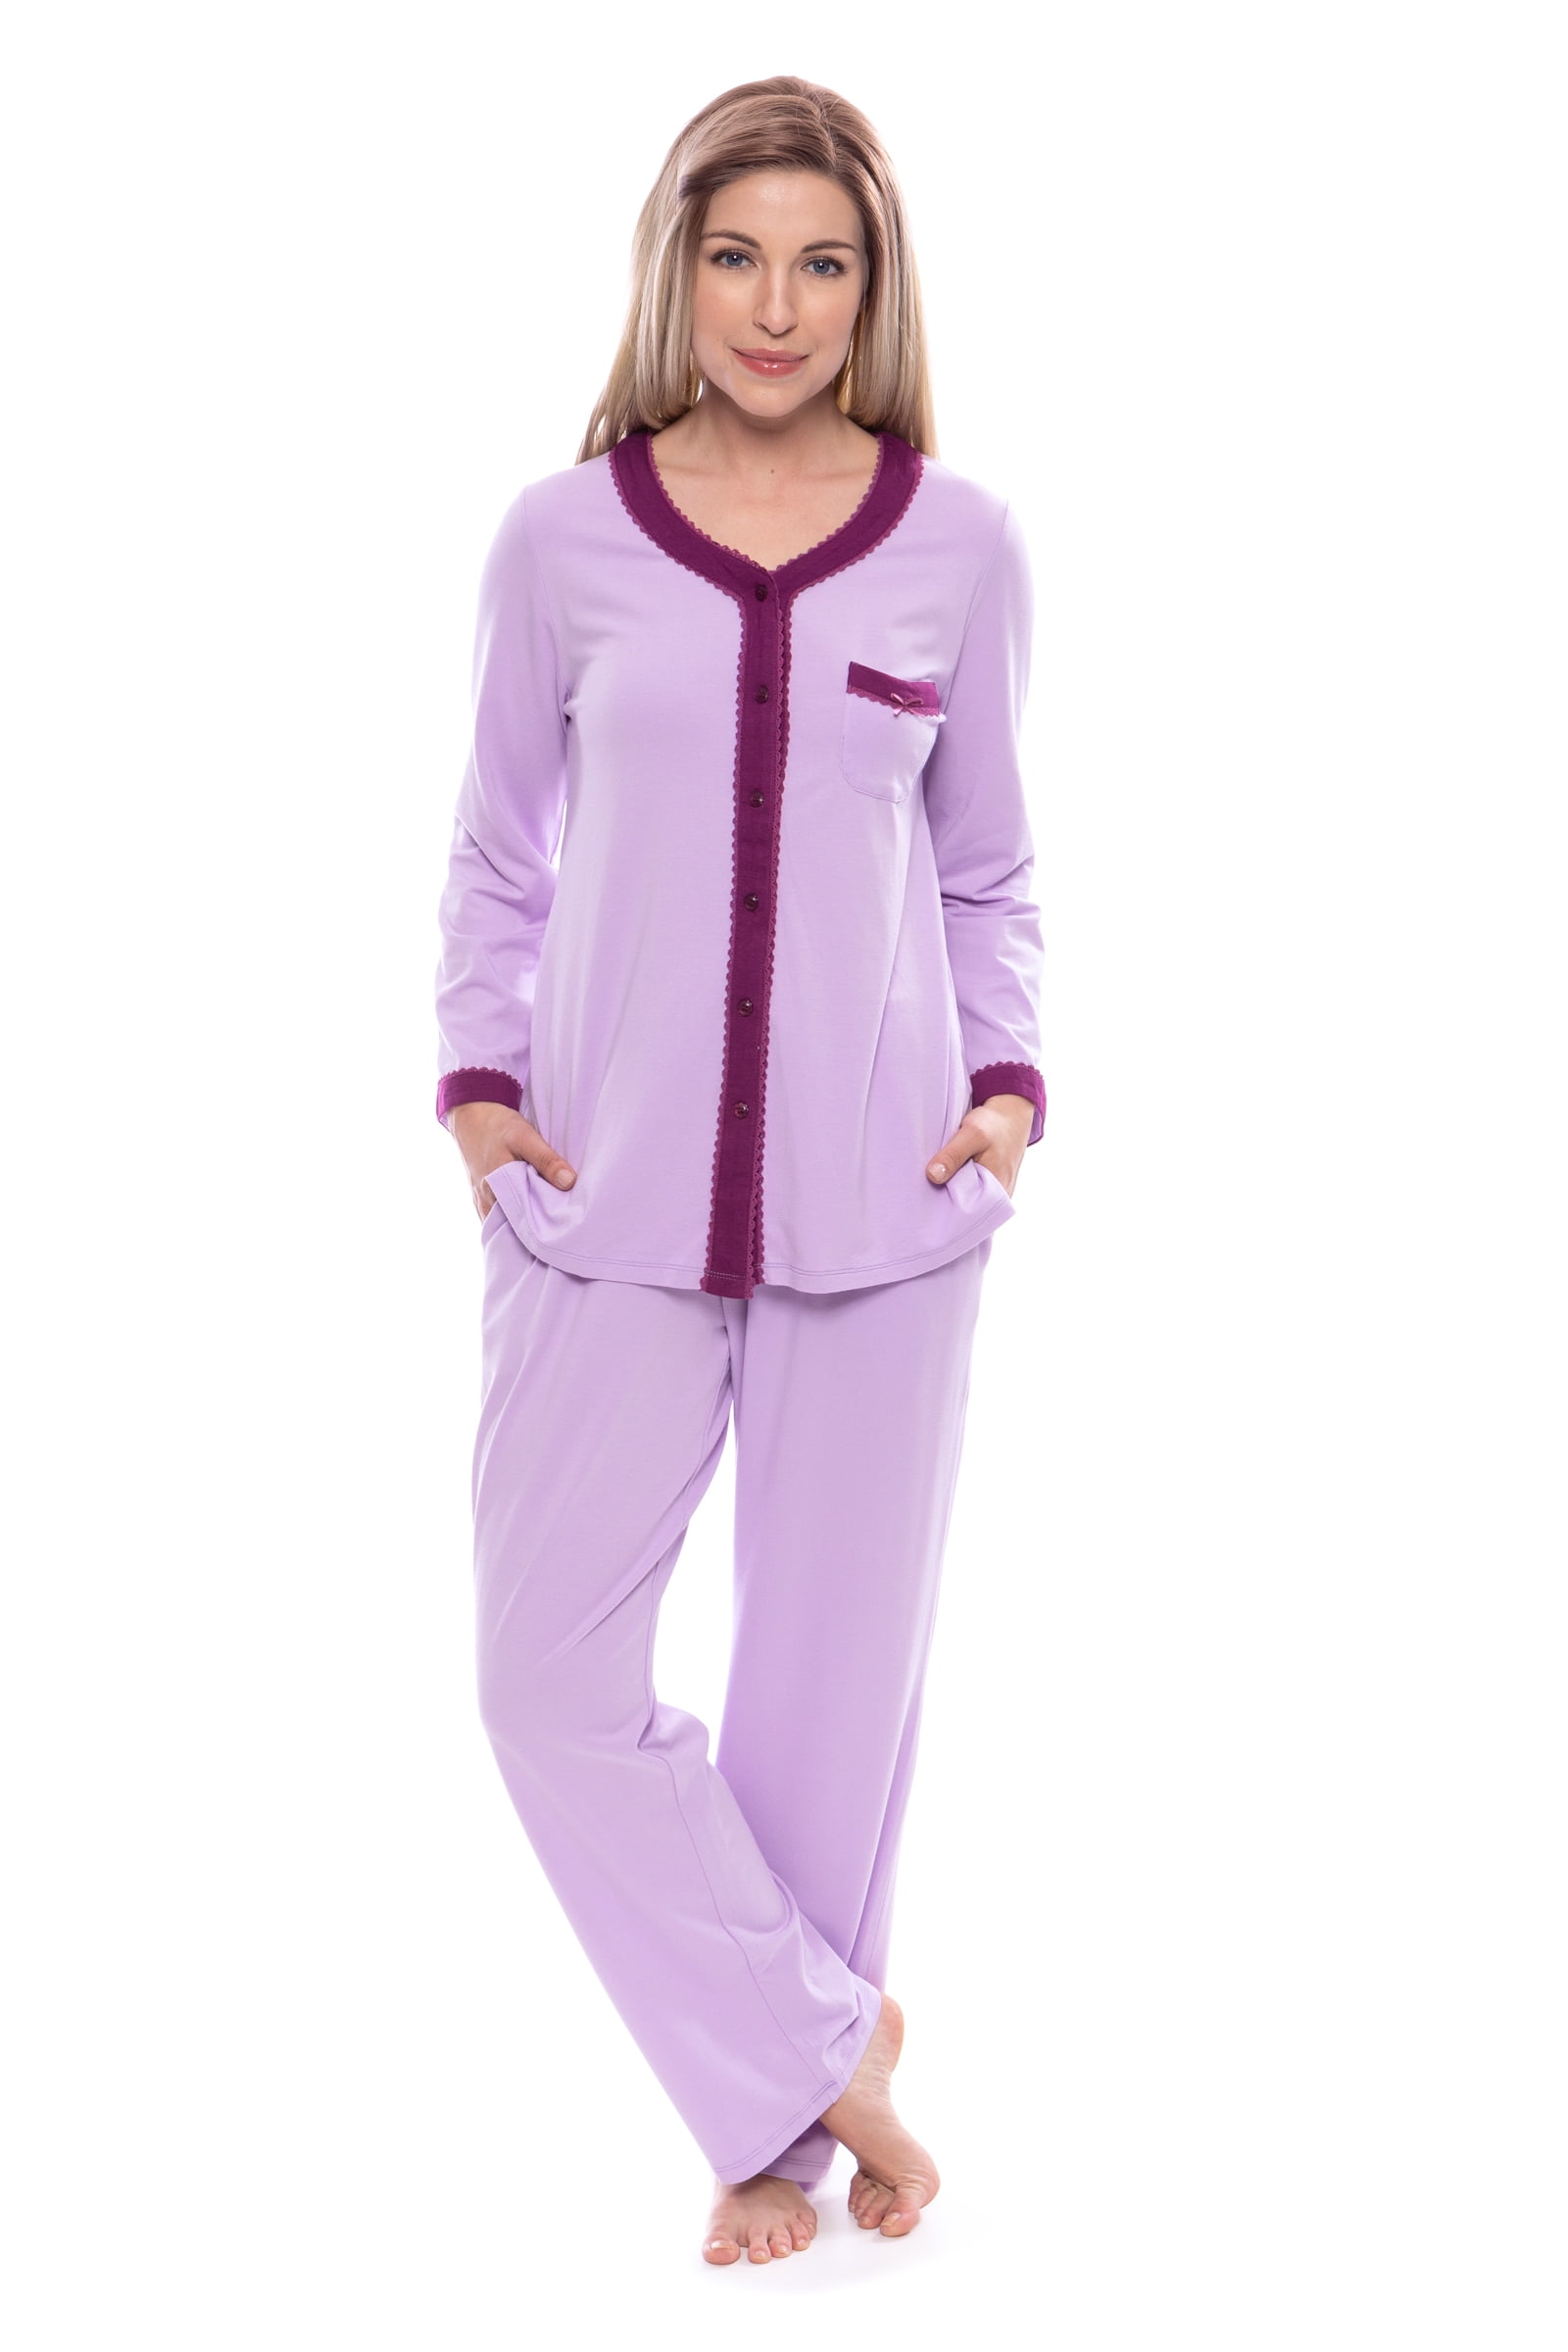 Texere - Women's Long Sleeve Pajama Set - Button Up Sleepwear by Texere